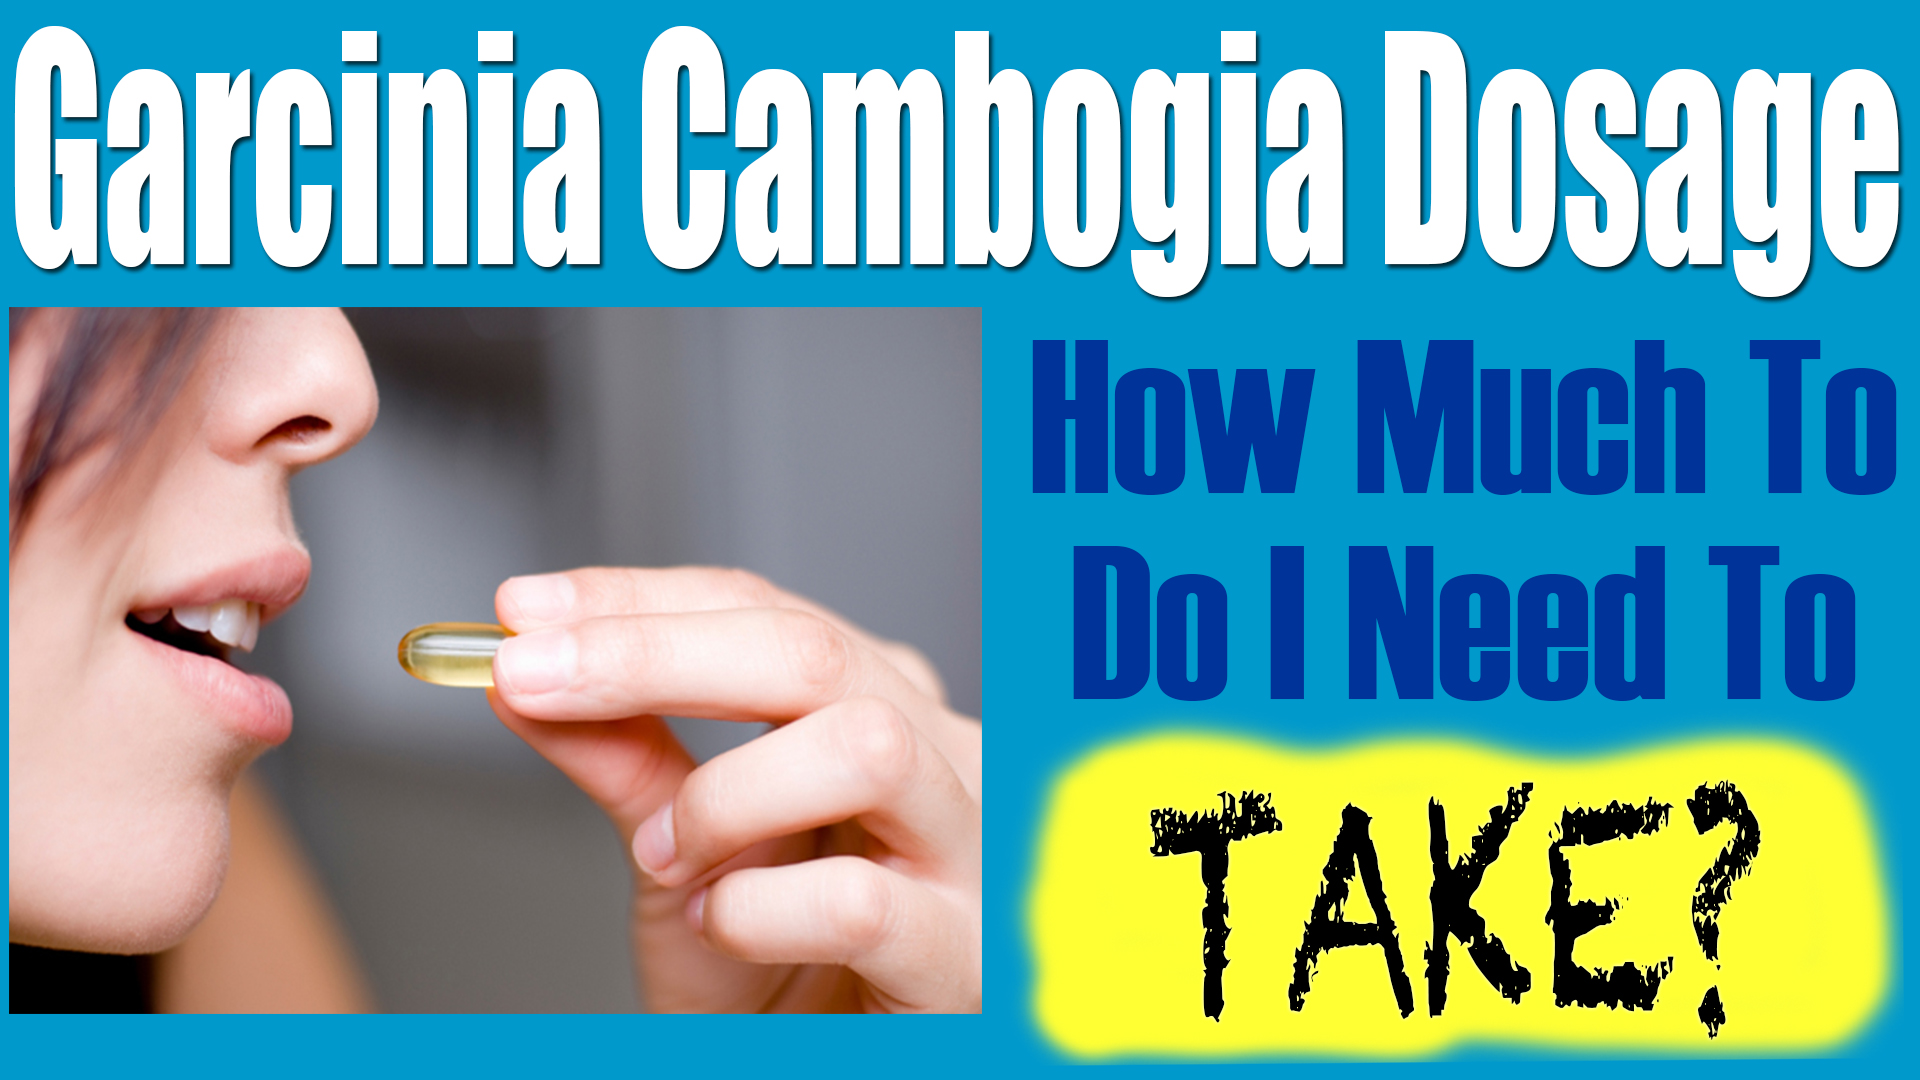 Garcinia Cambogia Dosage: What's The Right Amount For Weight Loss?